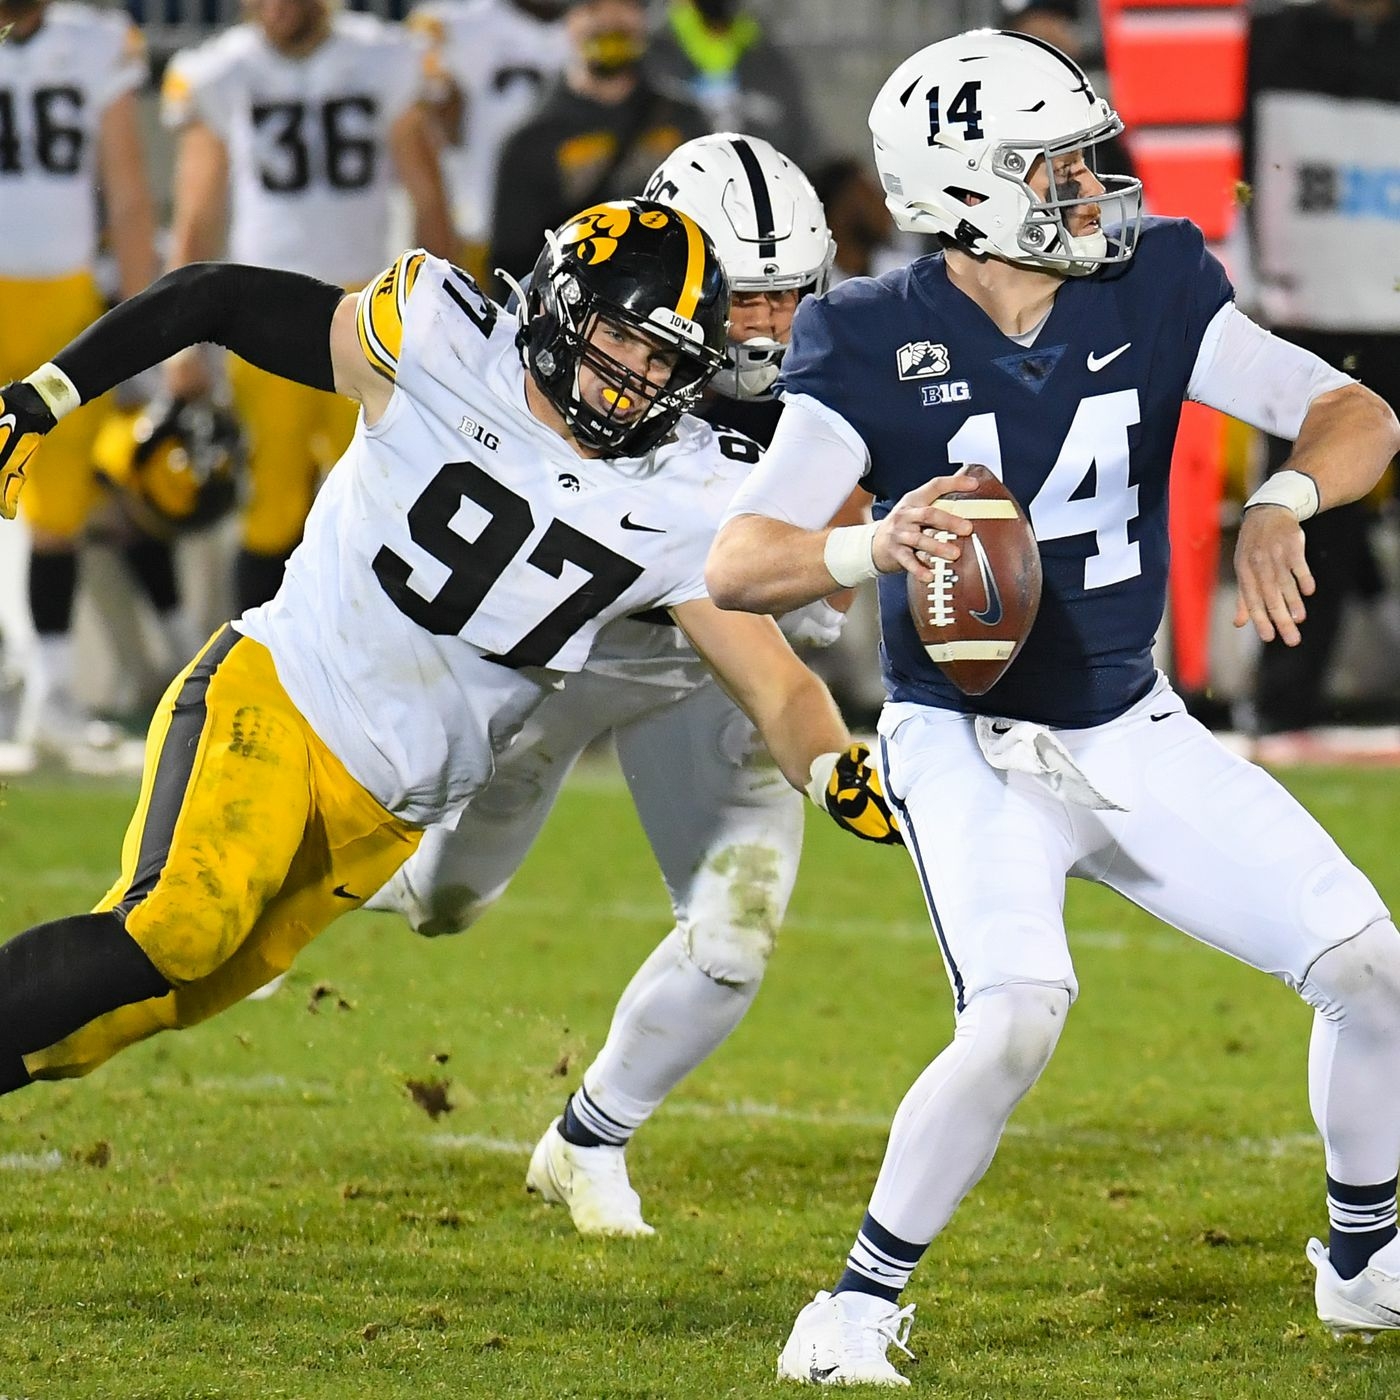 Penn State vs Auburn: Live streaming, watch online, tv channel, prediction, pick, spread, football game odds